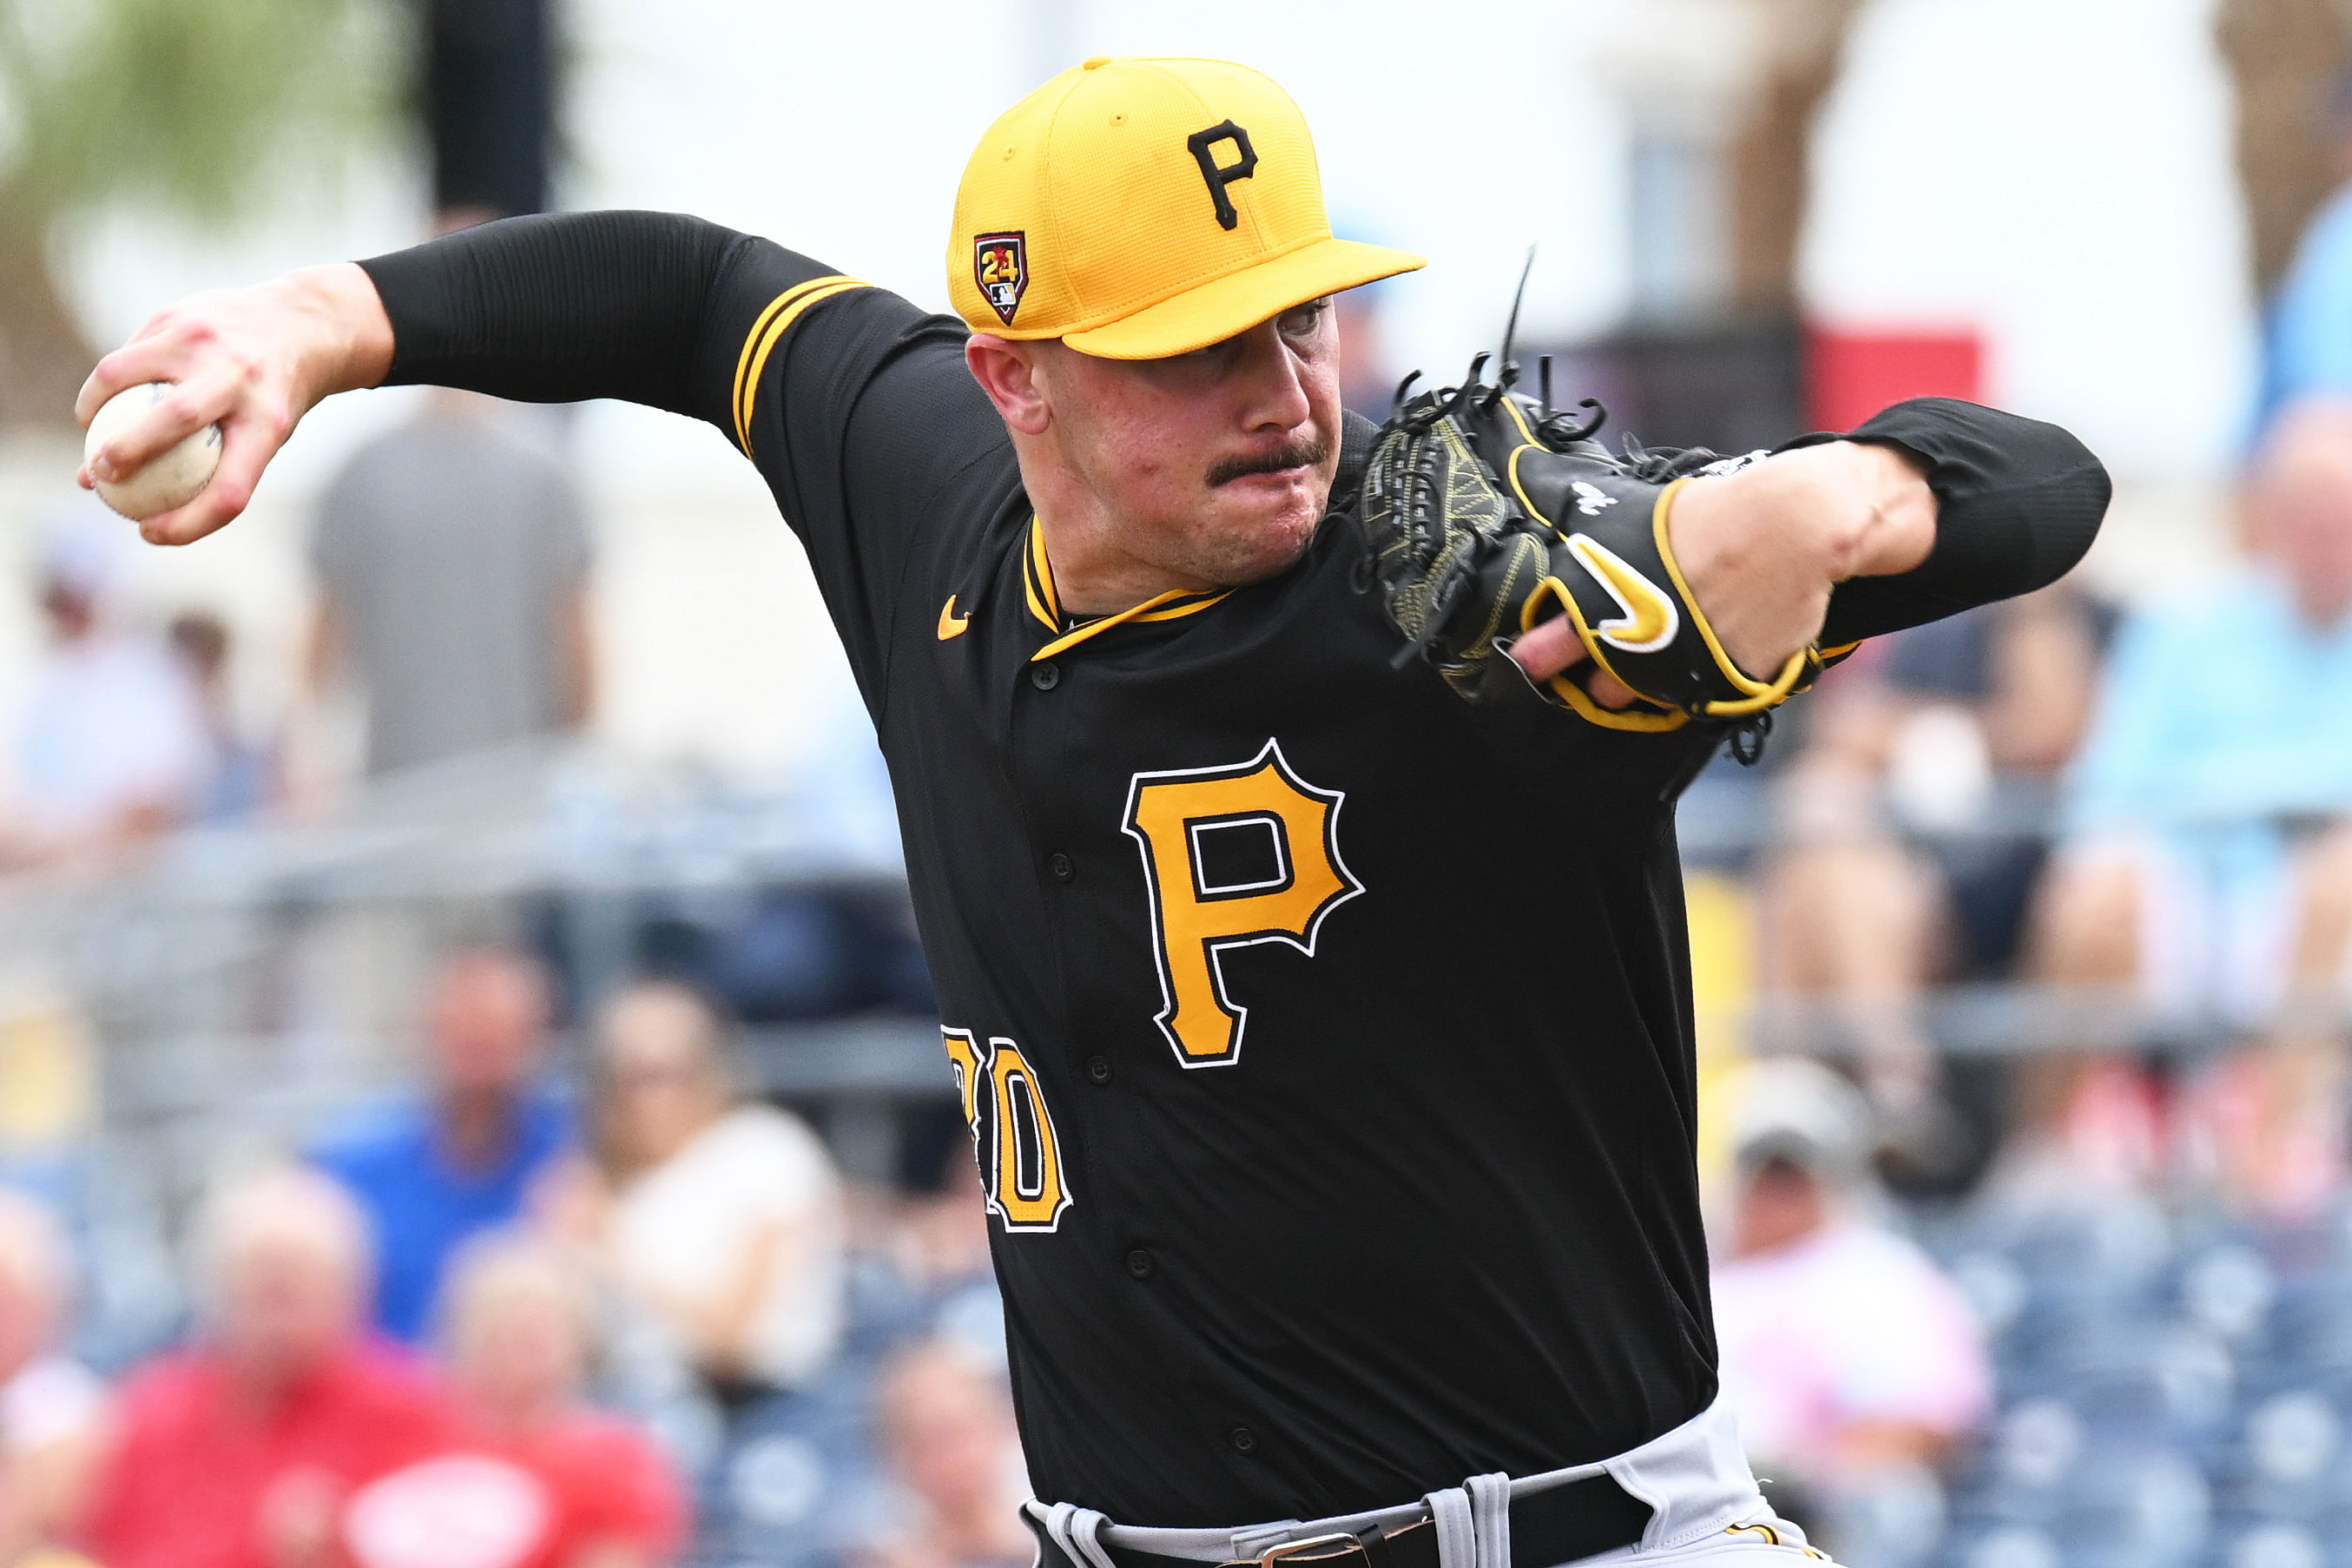 Dunne&rsquo;s boyfriend, Paul Skenes, is one of the most interesting prospects in all of baseball, playing for the Pittsburgh Pirates organization.